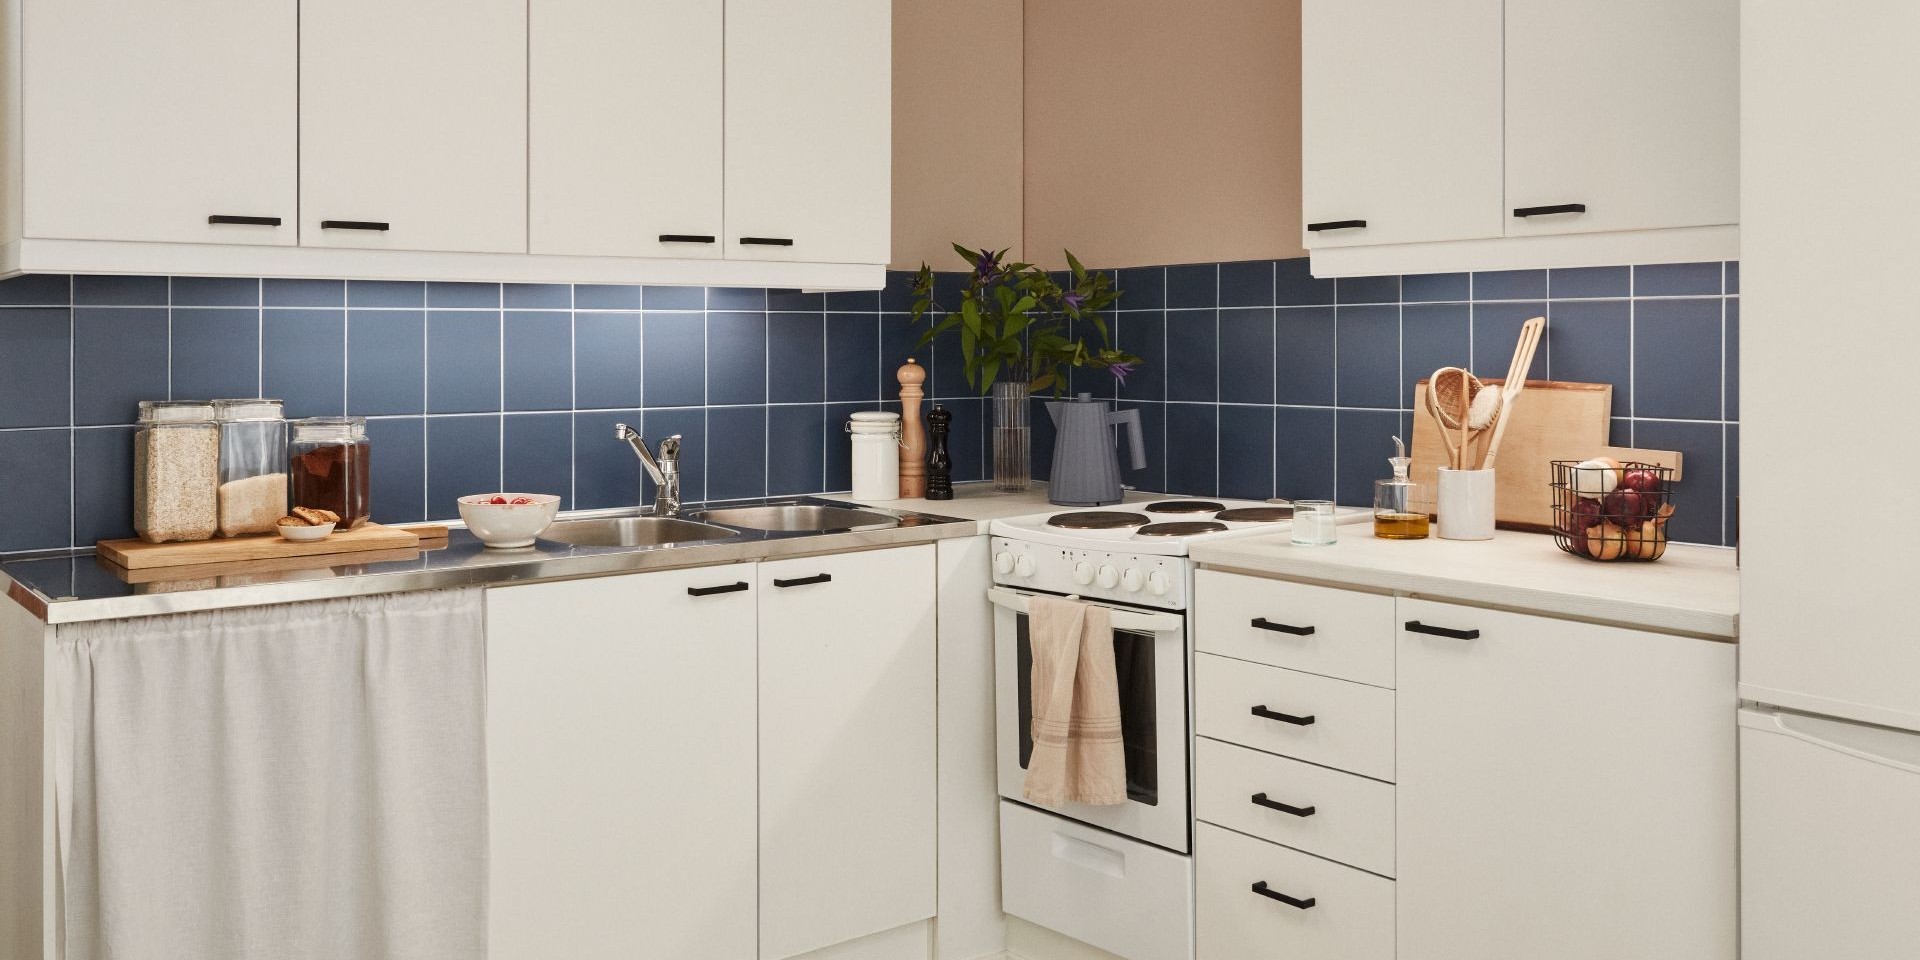 white kitchen with blue colour painted tile backsplash and muted beige wall